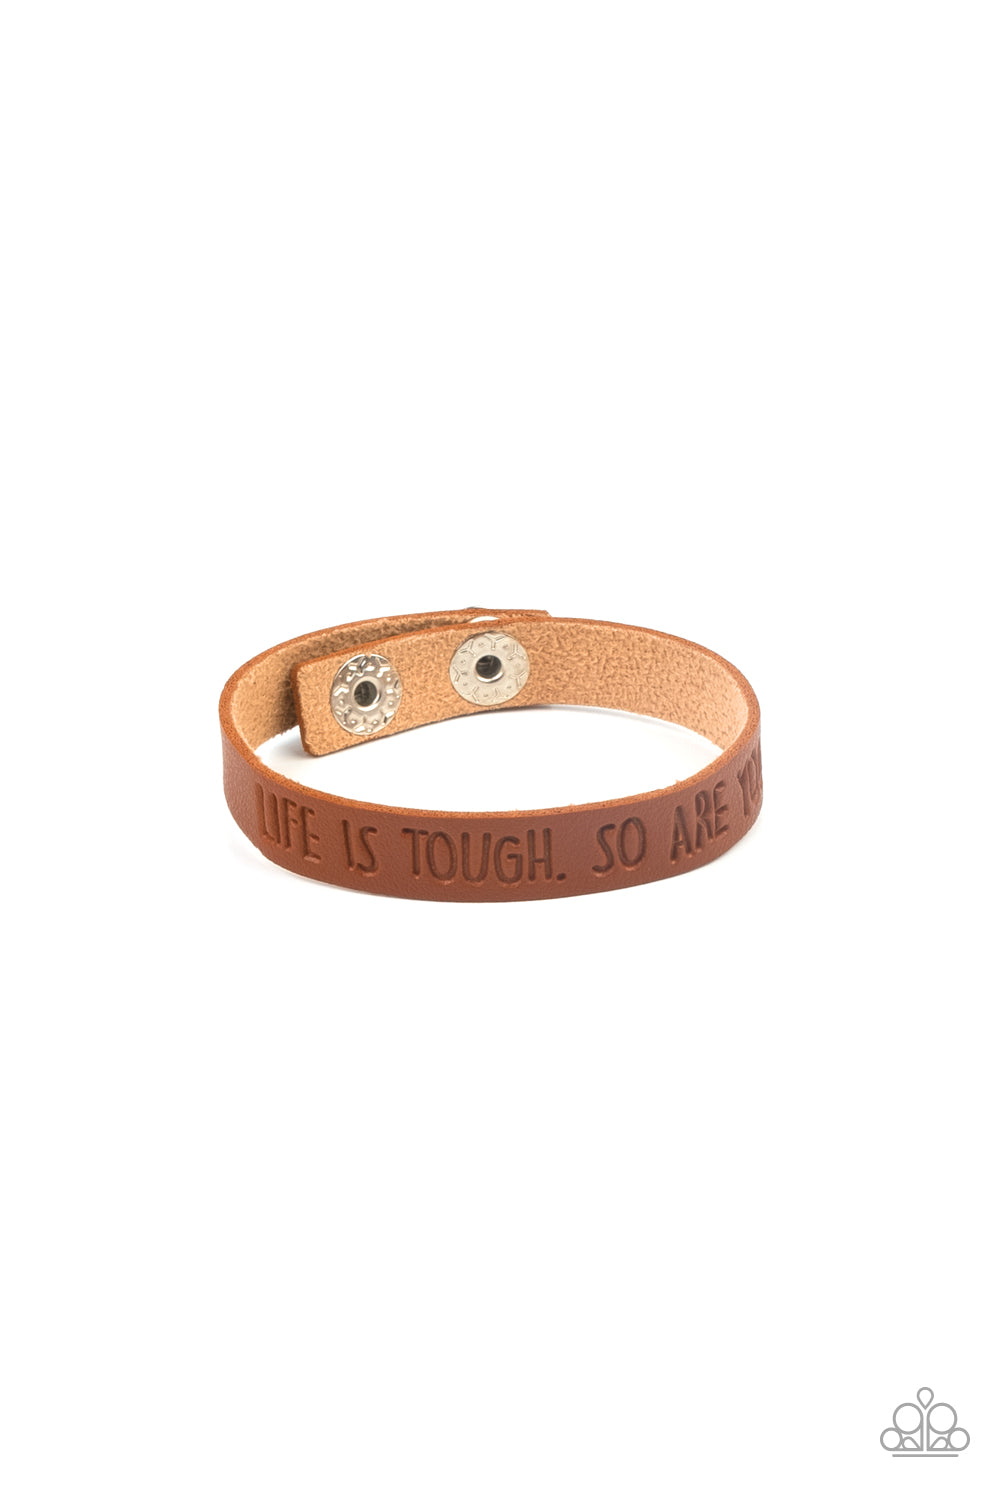 Life is Tough Brown Wrap Bracelet - Paparazzi Accessories  A dainty brown leather band is stamped in the phrase, "Life is tough. So Are You.," creating an inspiring centerpiece around the wrist. Features an adjustable snap closure.  All Paparazzi Accessories are lead free and nickel free!  Sold as one individual bracelet.